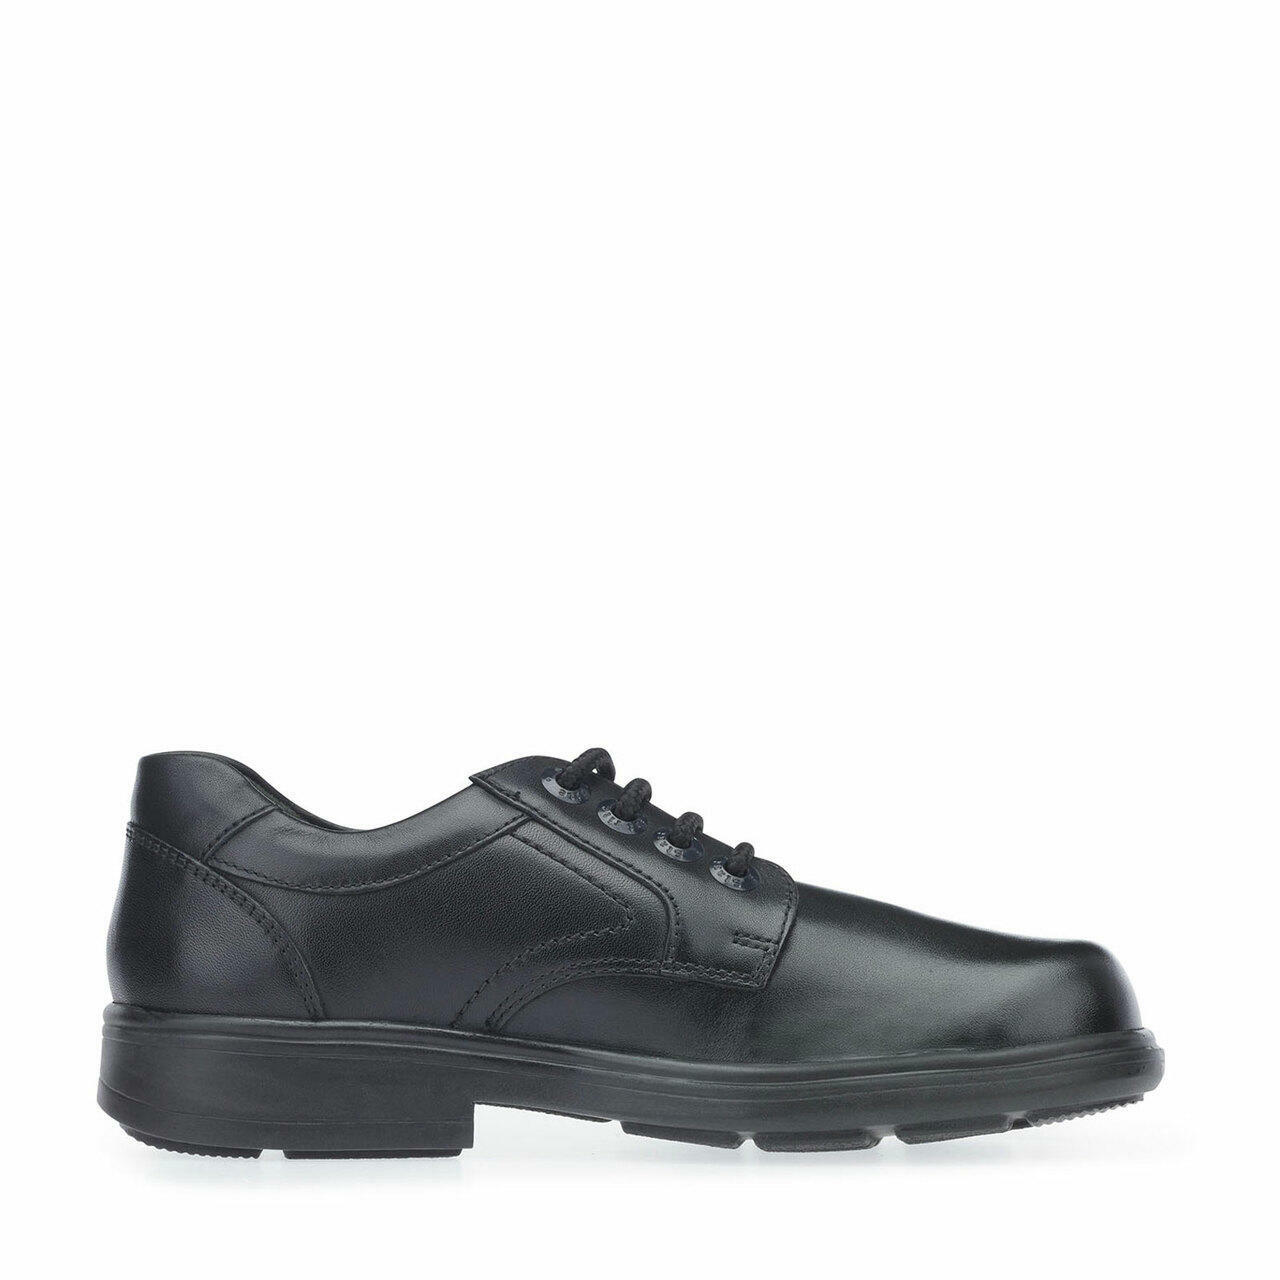 A boys school shoe by Start Rite,style Isaac, in black leather with lace up fastening. Right side  view.